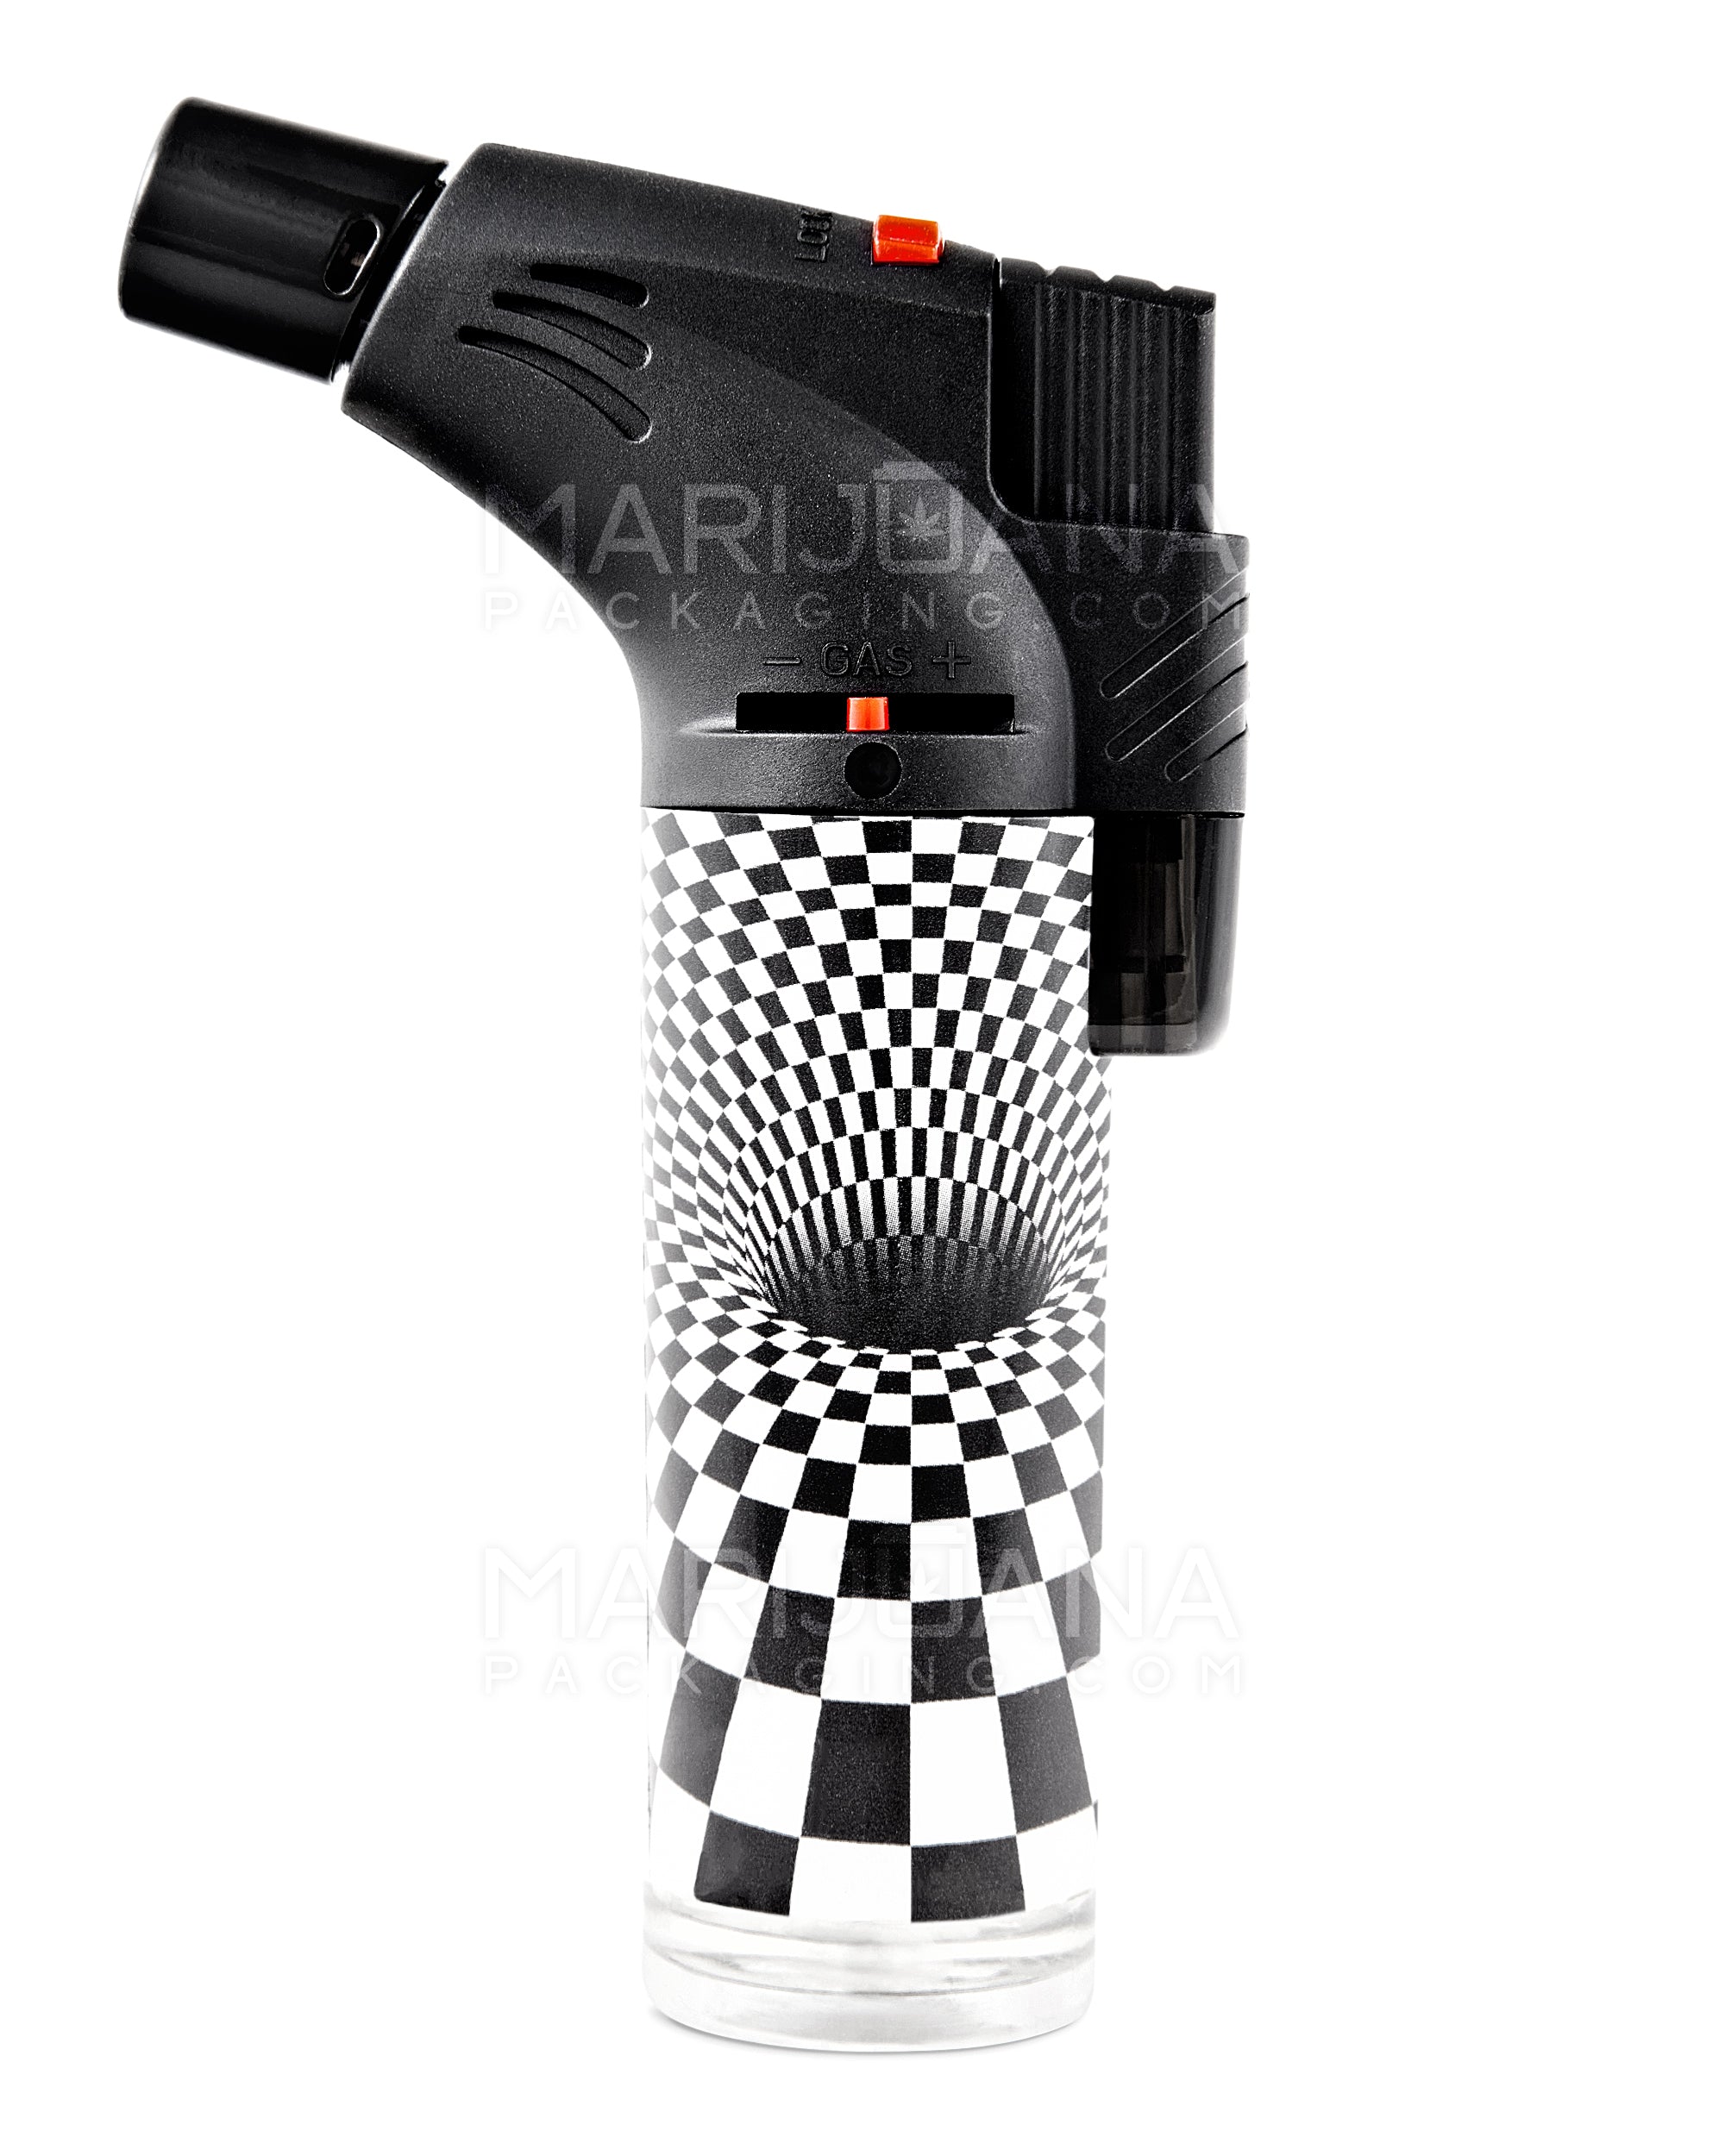 Psychedelic Design Plastic Torch w/ Safety Lock | 4.5in Tall - Butane - Assorted - 12